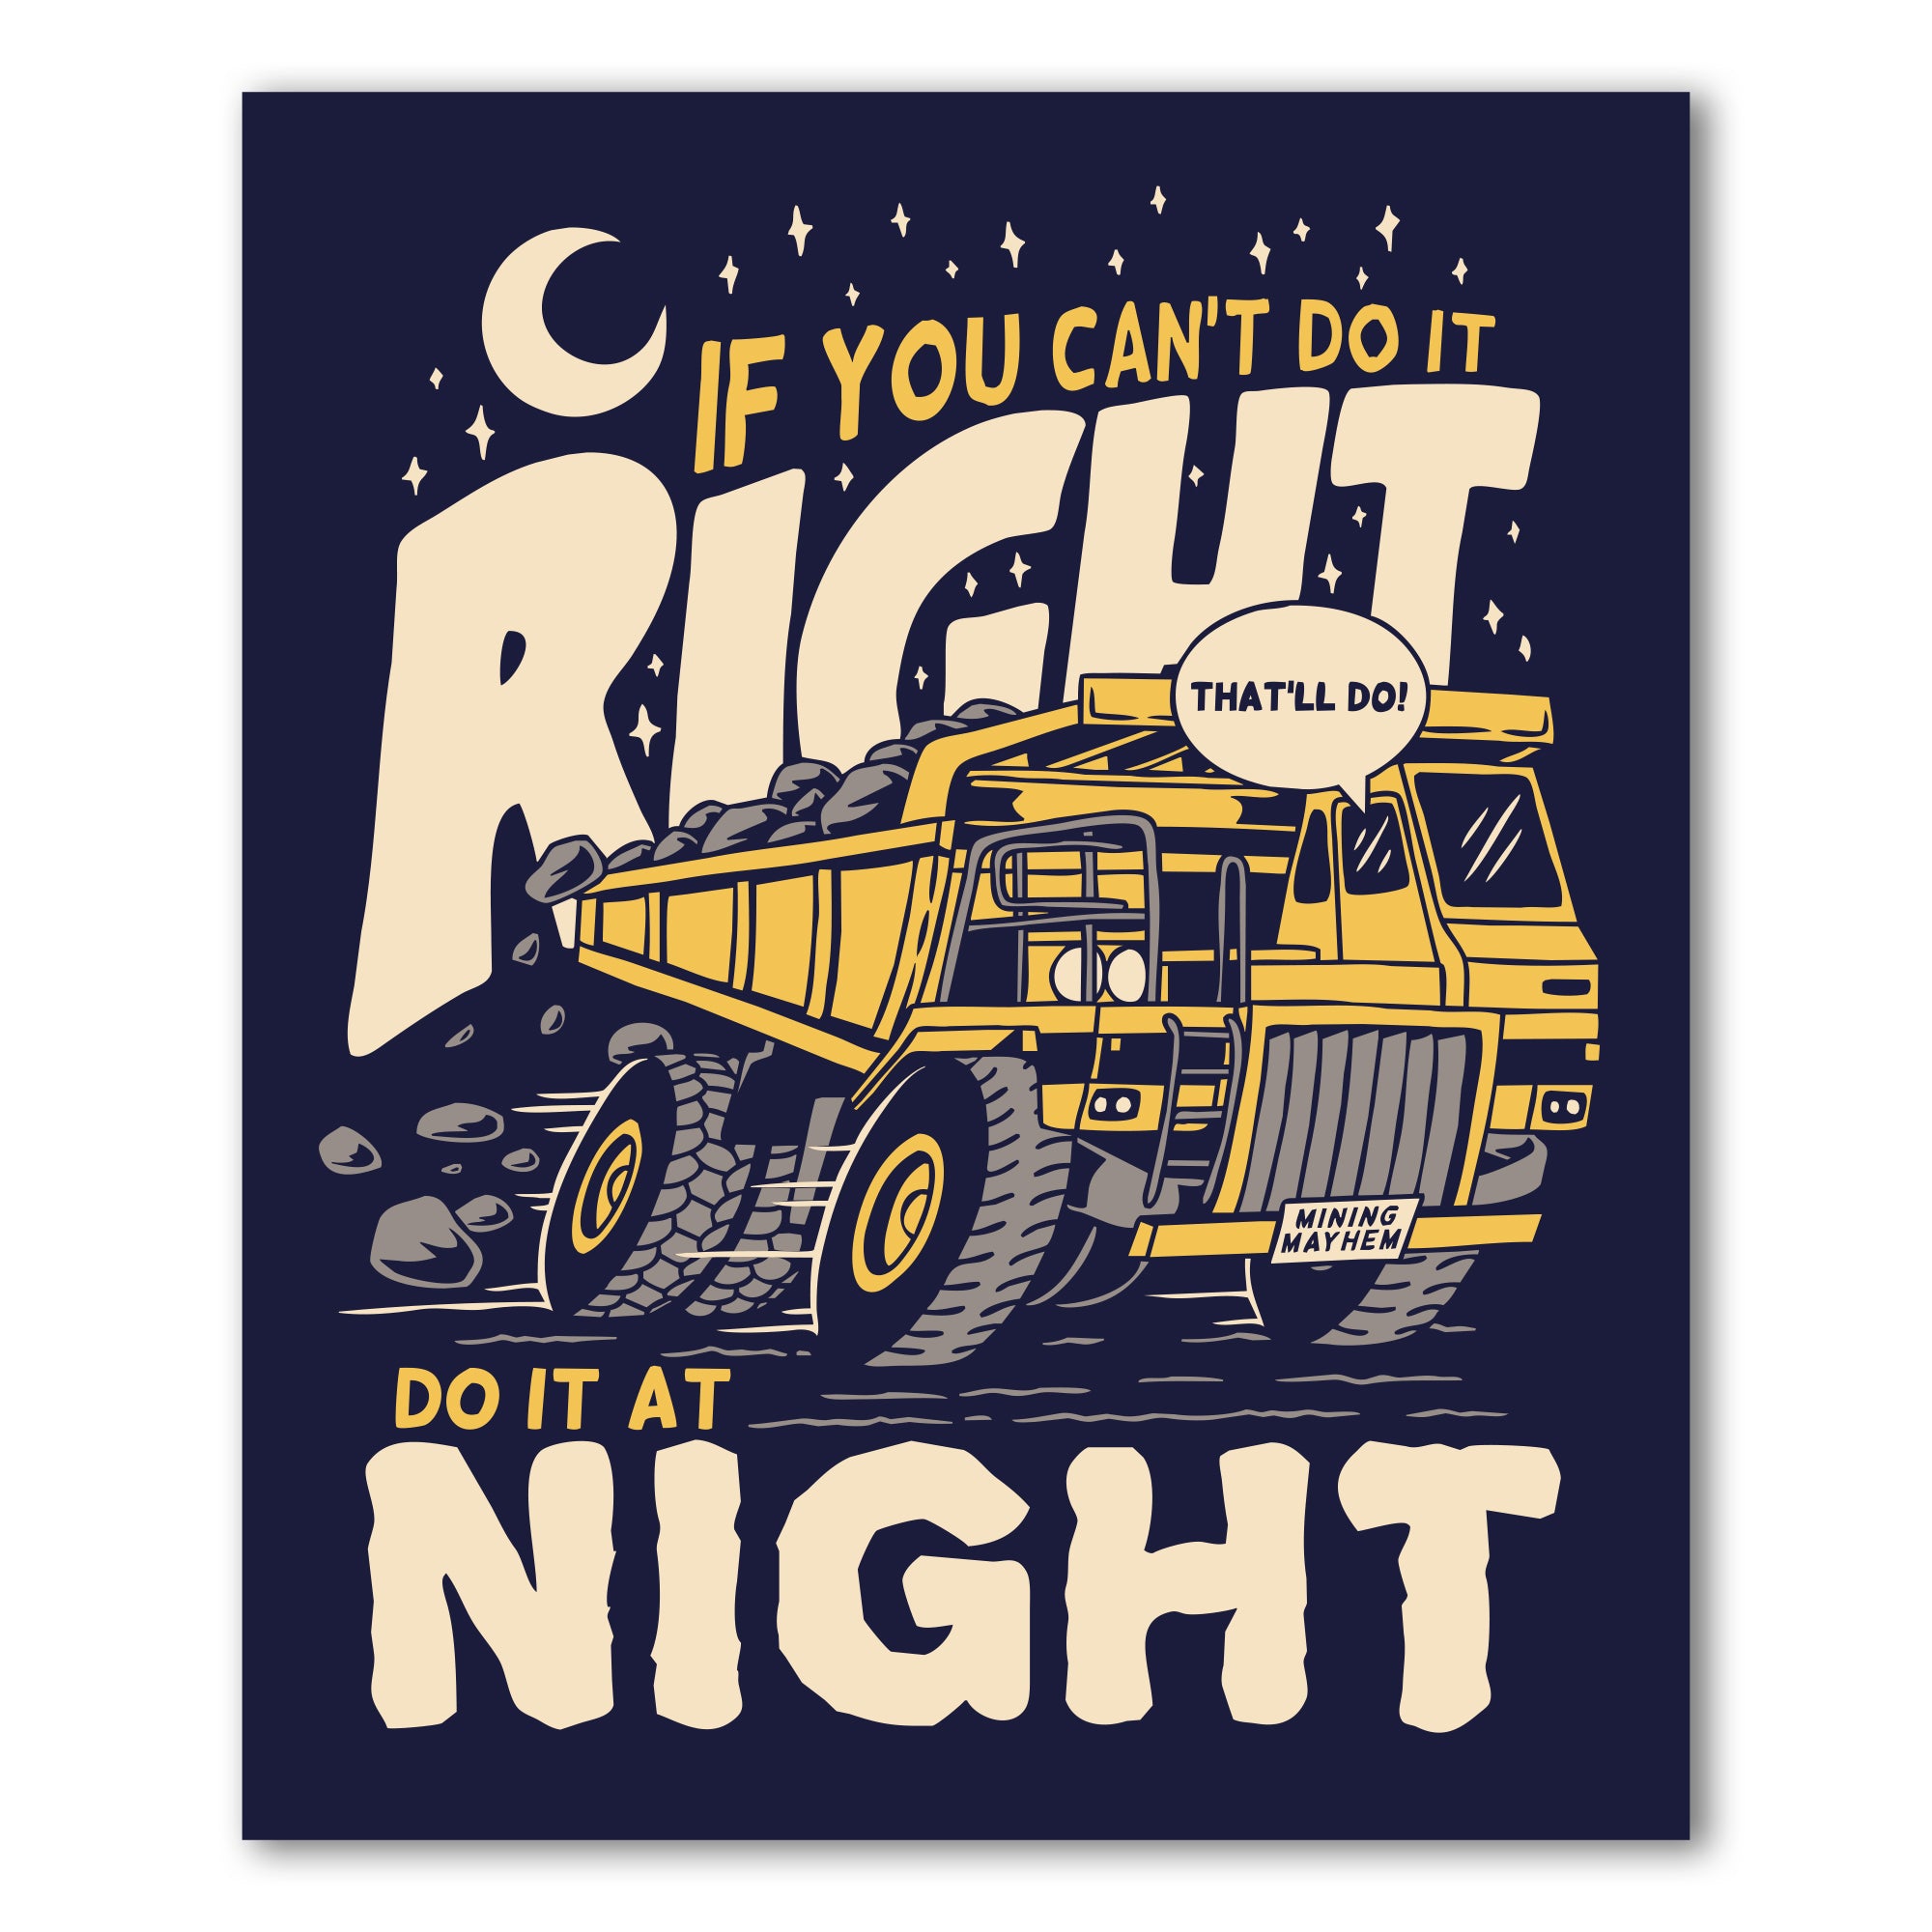 If You Can't Do It Right, Do It At Night - Sticker